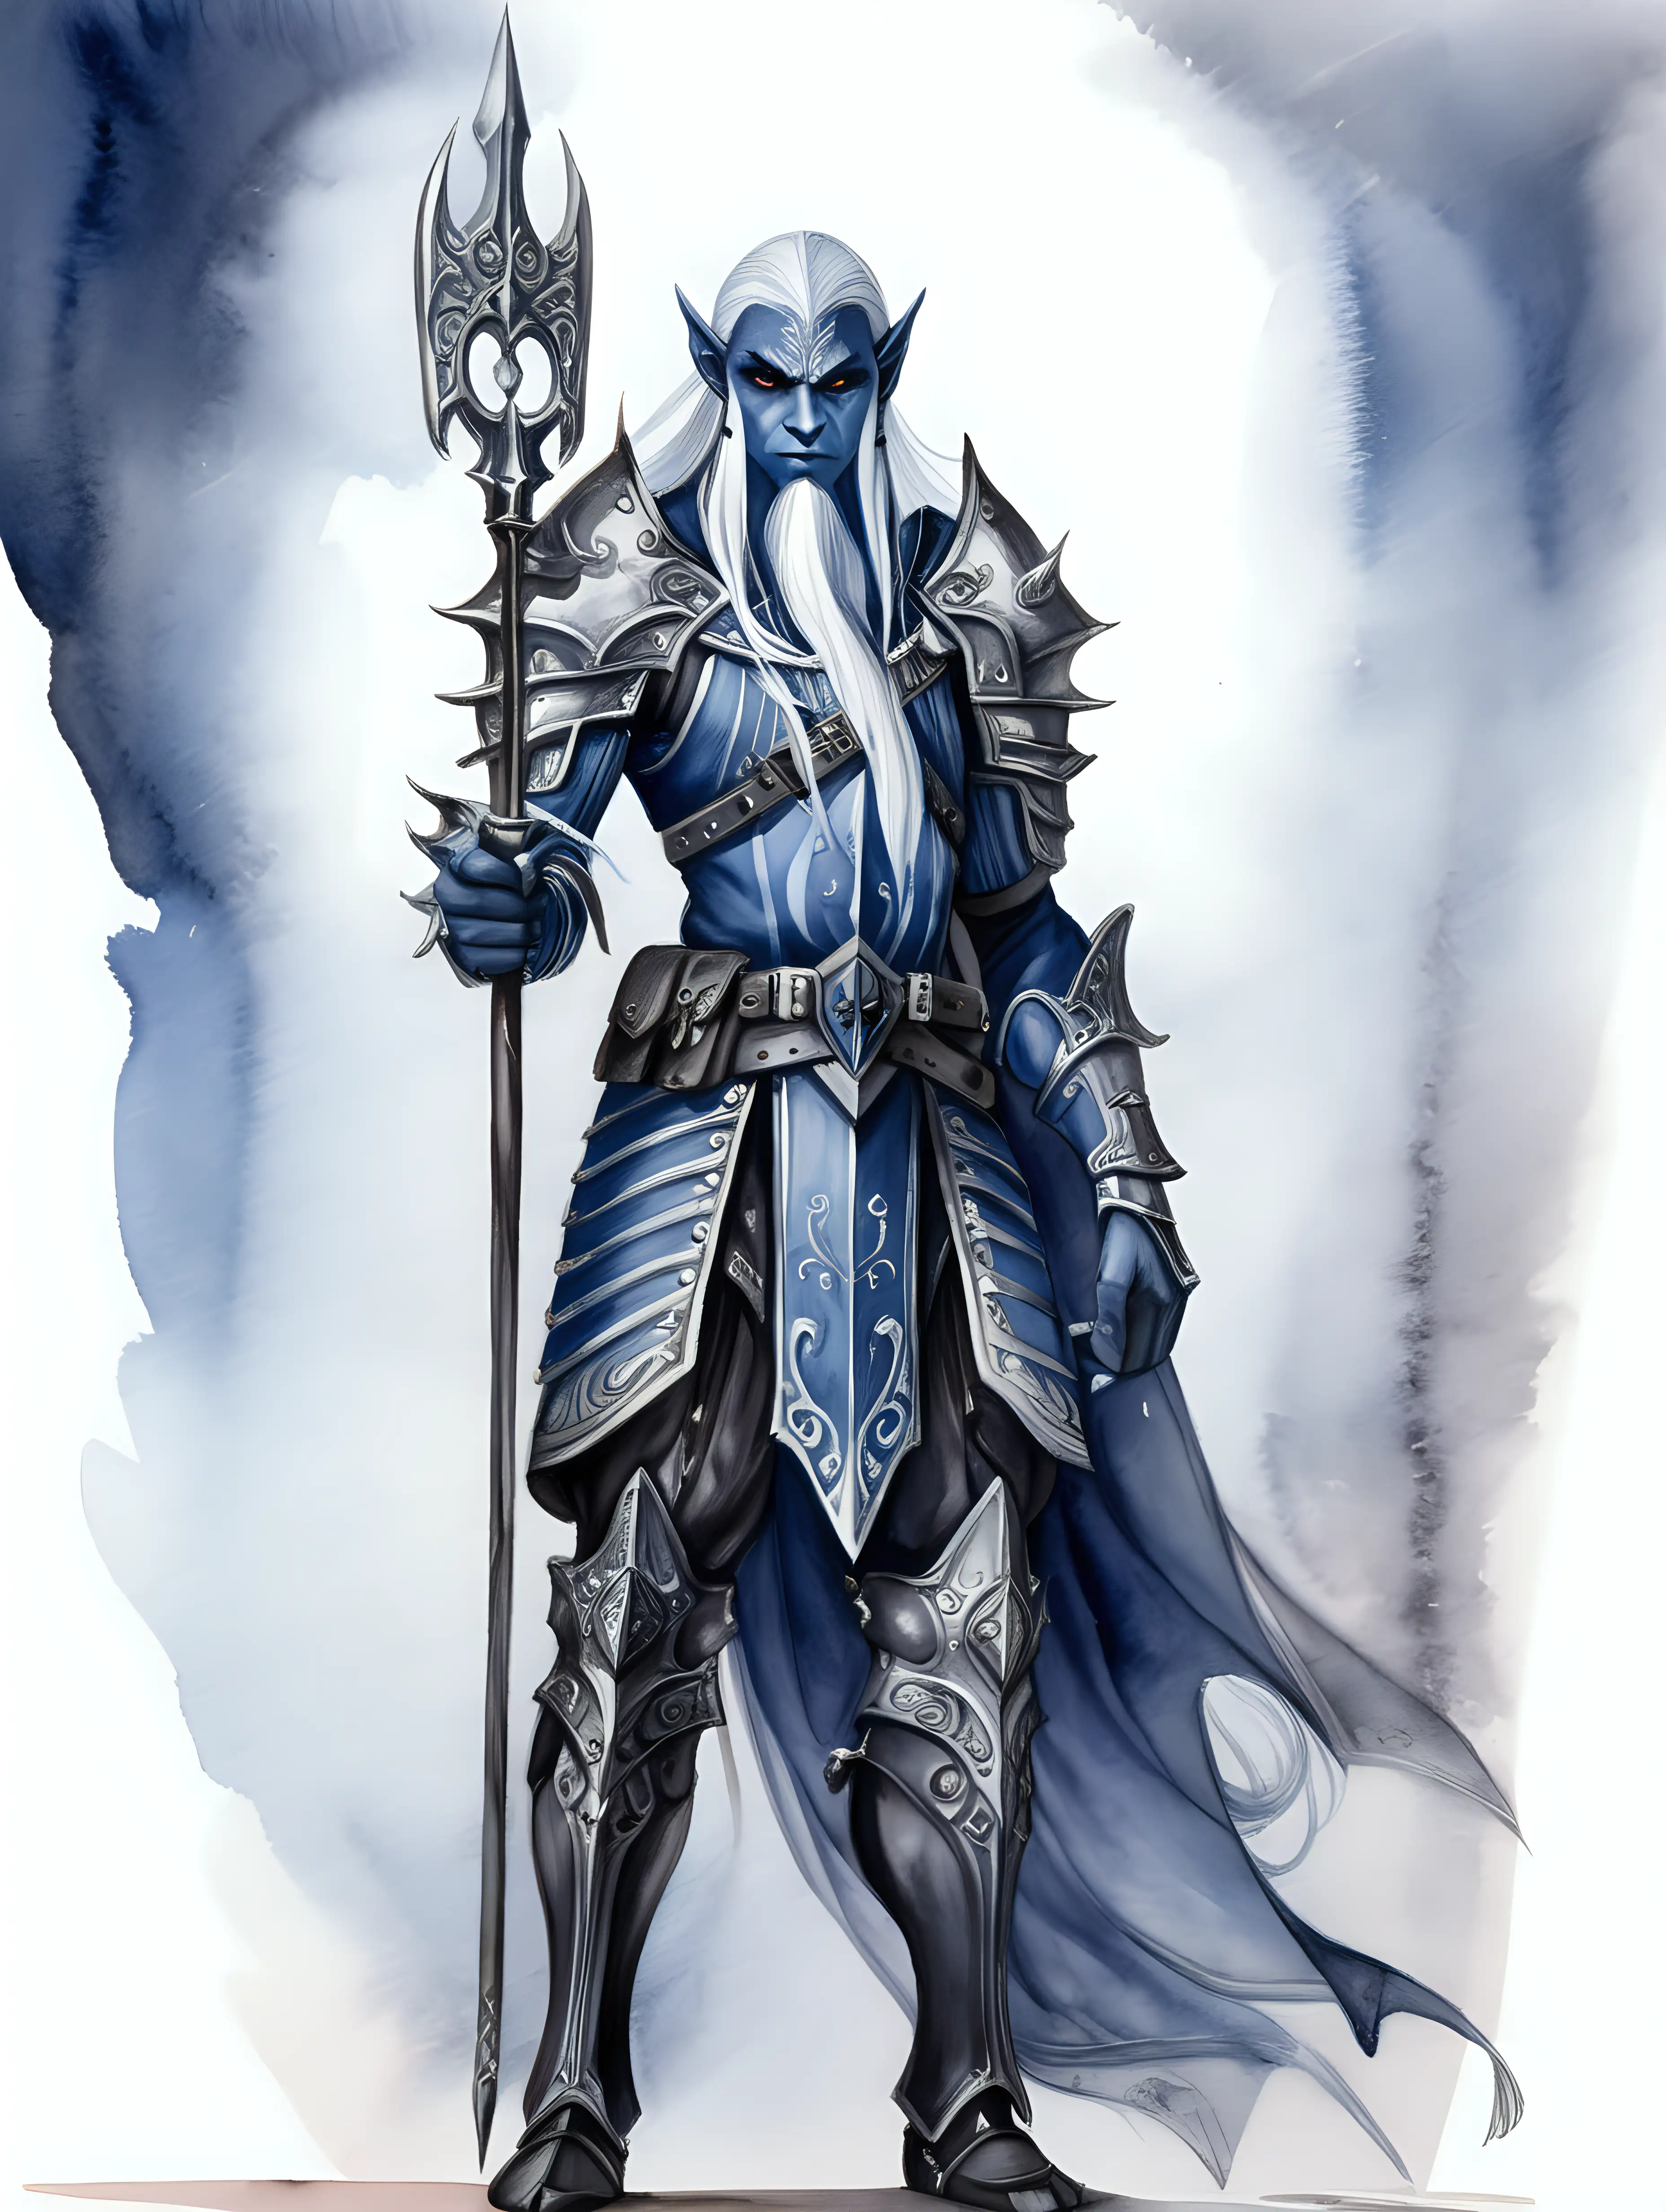 Drow Guard Captain in a Fantastical Watercolor Drawing